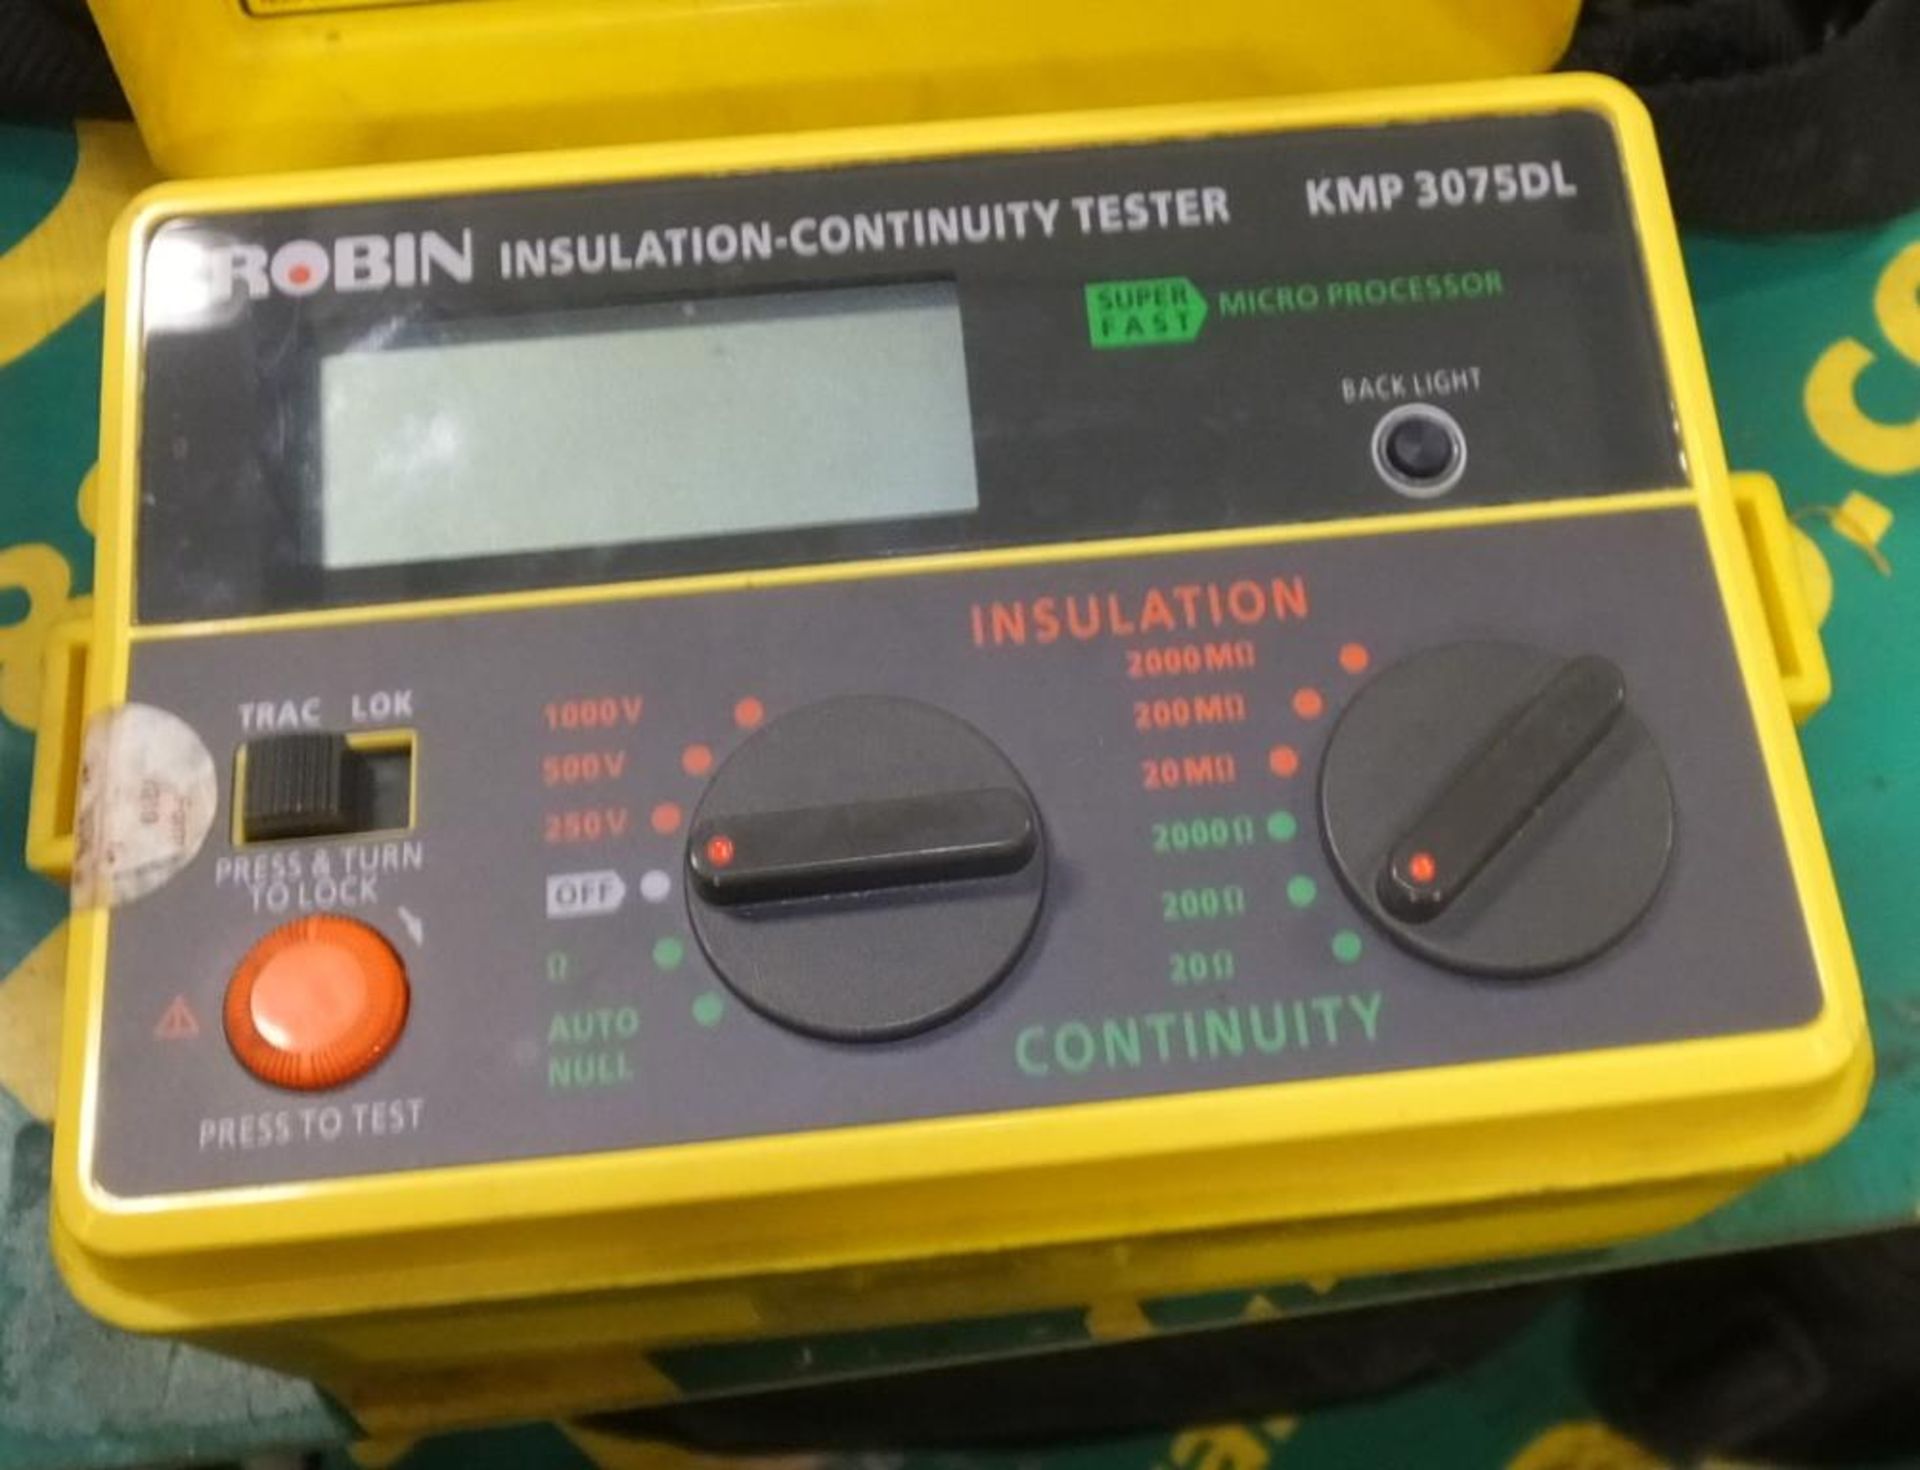 Robin Insulation Continuity Tester KMP 3075DL, cables and carry bag - Image 2 of 3